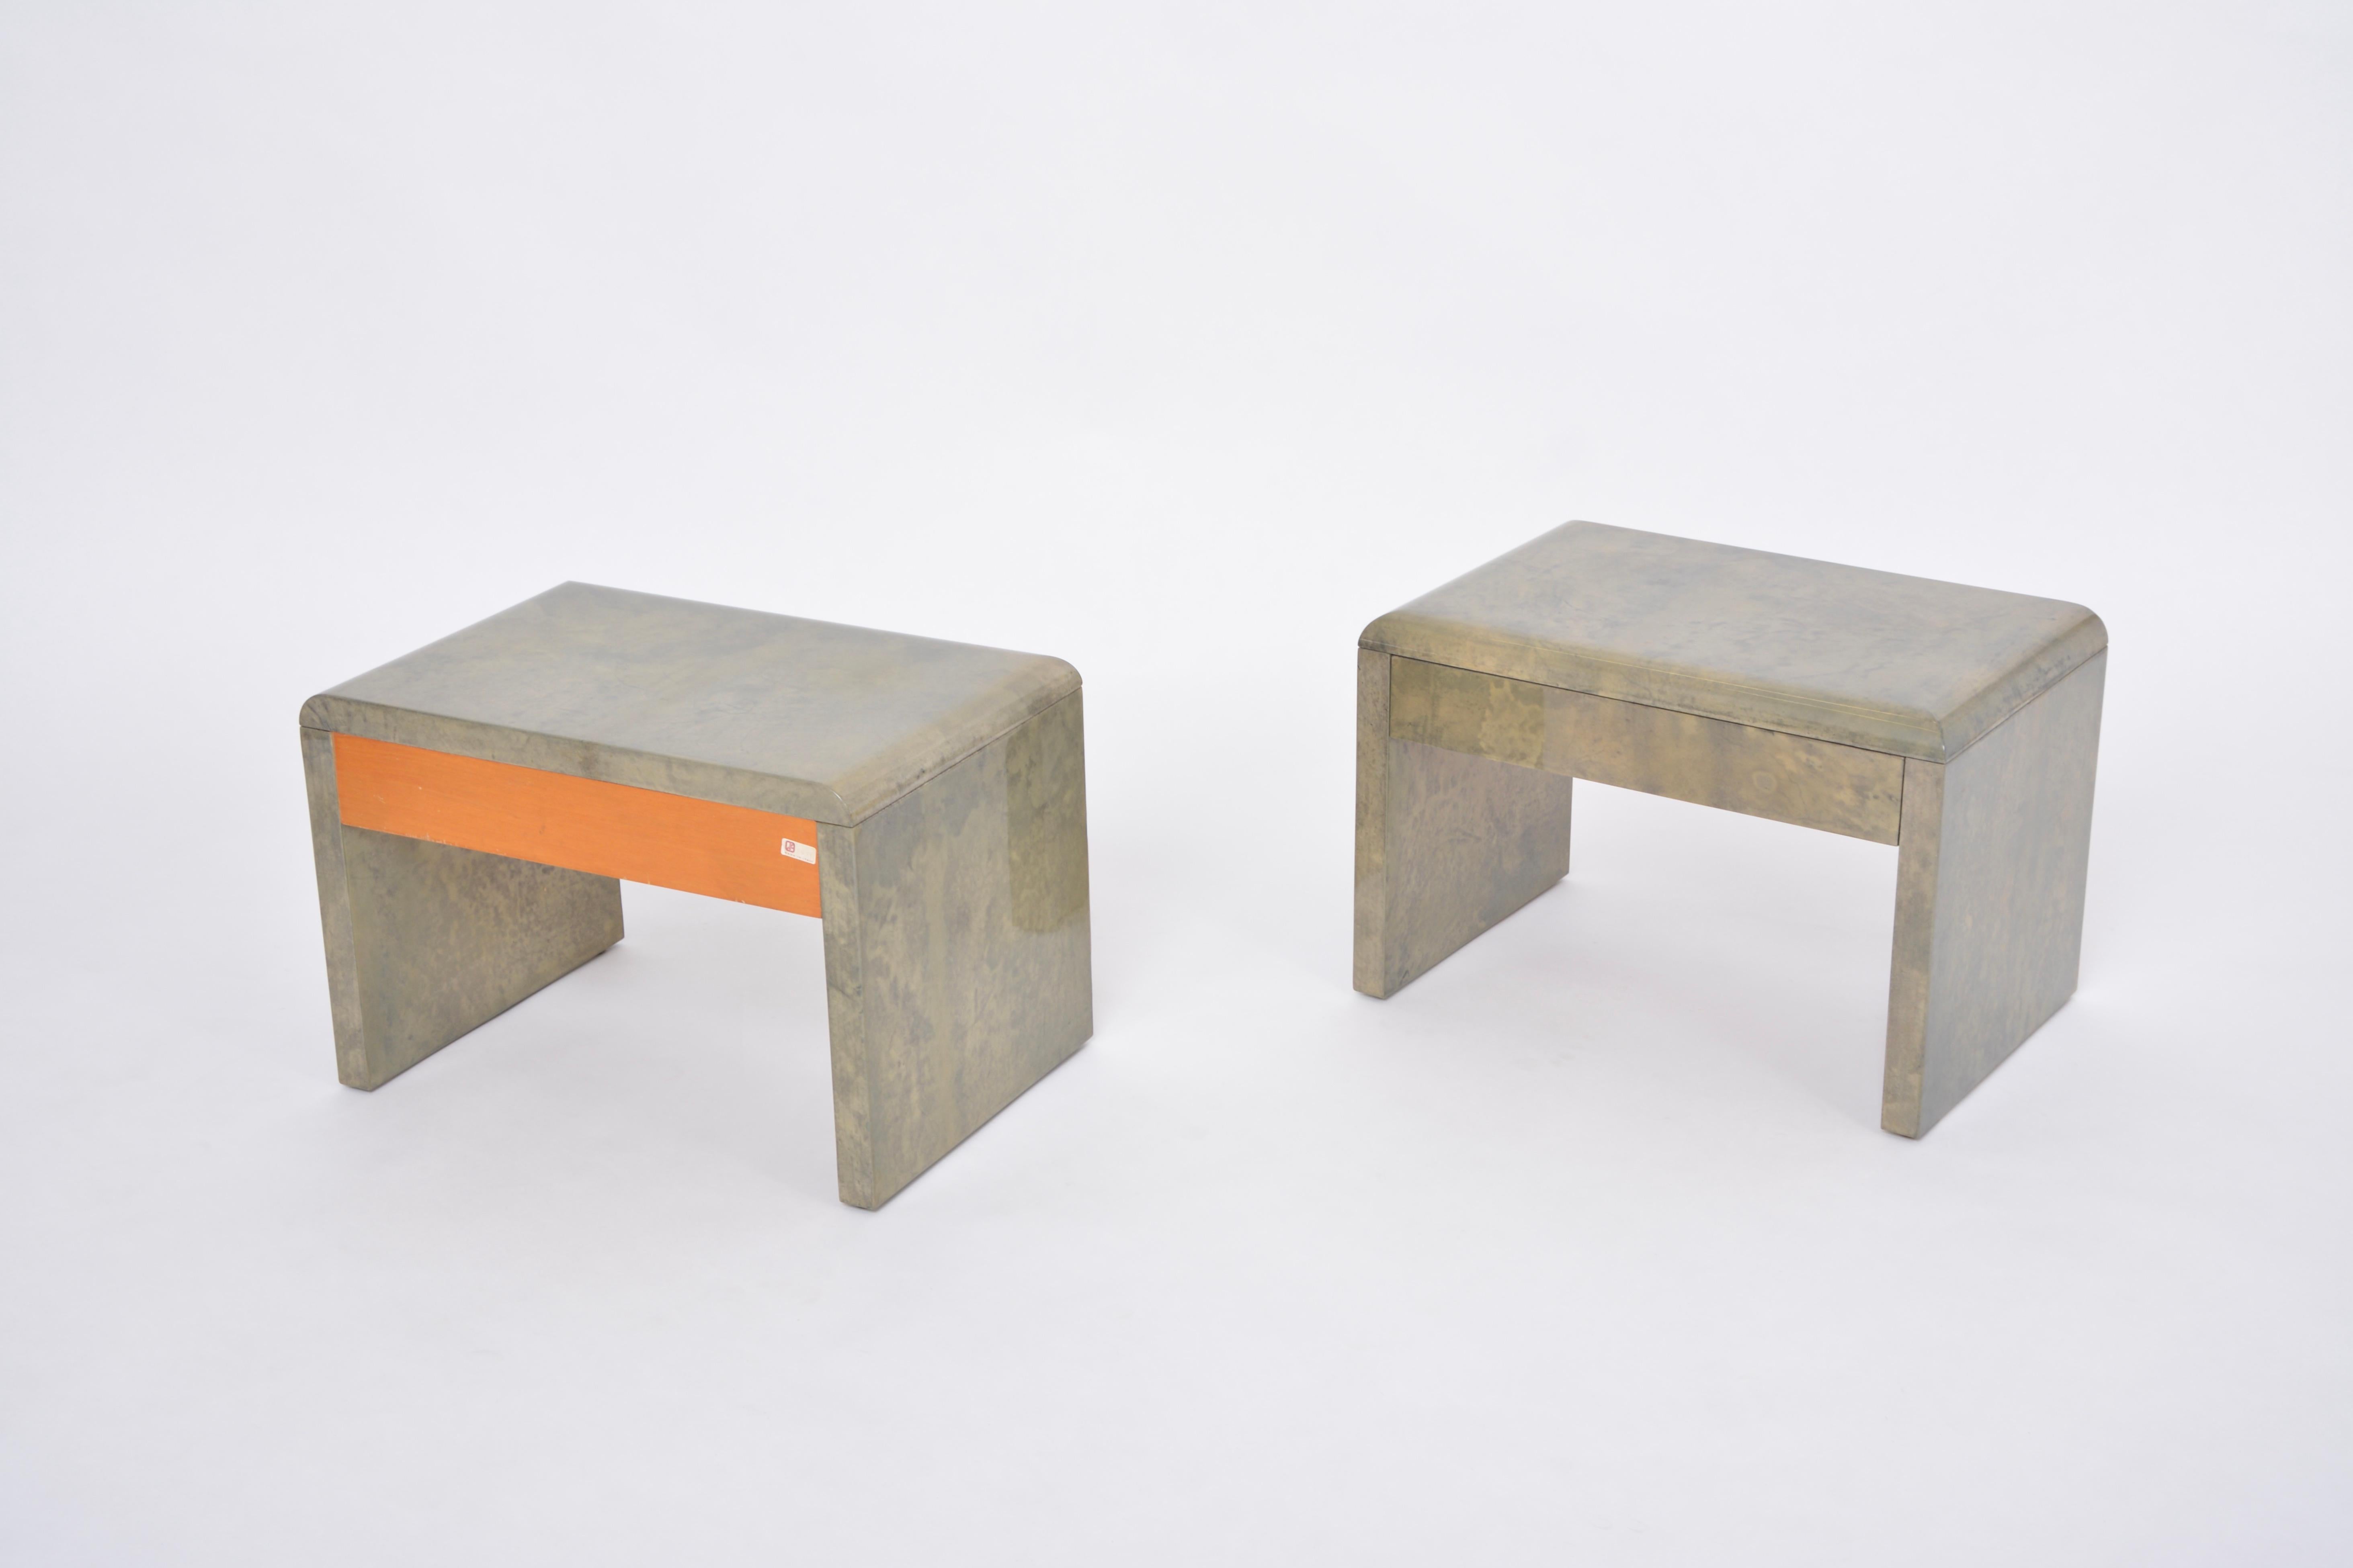 Goatskin Mid-Century Modern Bedside Tables Made of Laquered Goat Skin by Aldo Tura